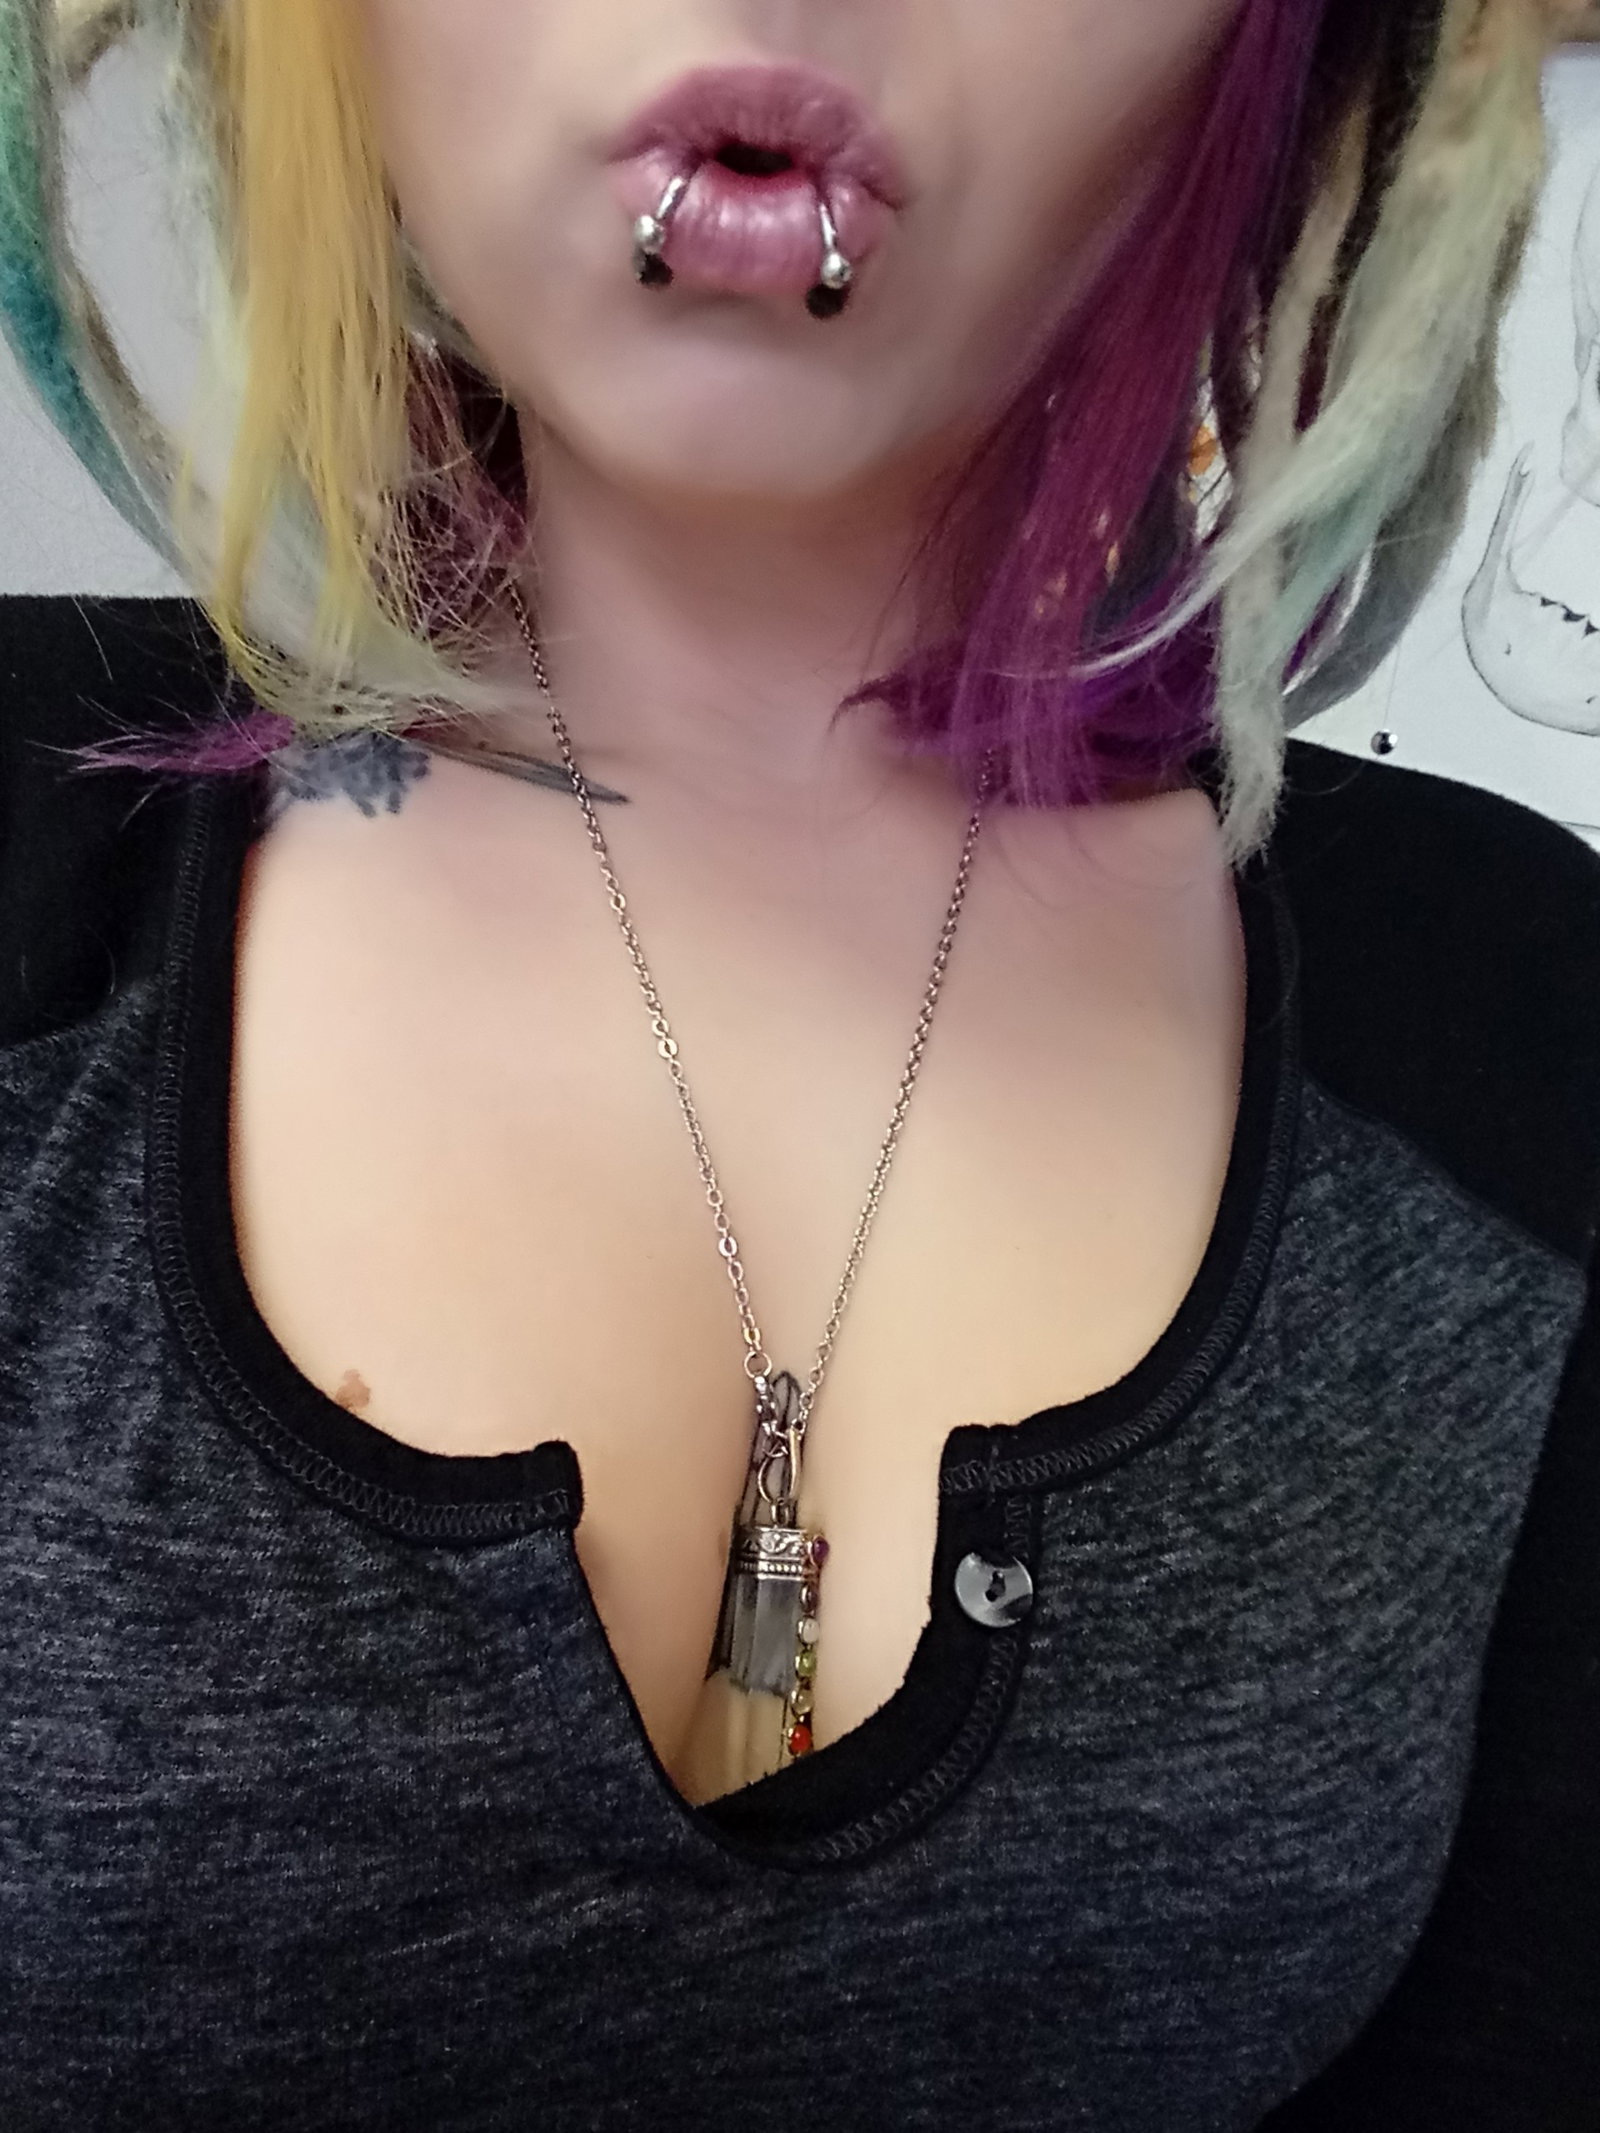 Photo by Princesskitten with the username @Princesskitten, who is a star user,  April 9, 2019 at 6:17 PM. The post is about the topic Hot Goth Girlfriend and the text says 'I wanna cum but Im stuck being a good girl at work 😒 Follow my only fans to see how naughty I have been being 😉'